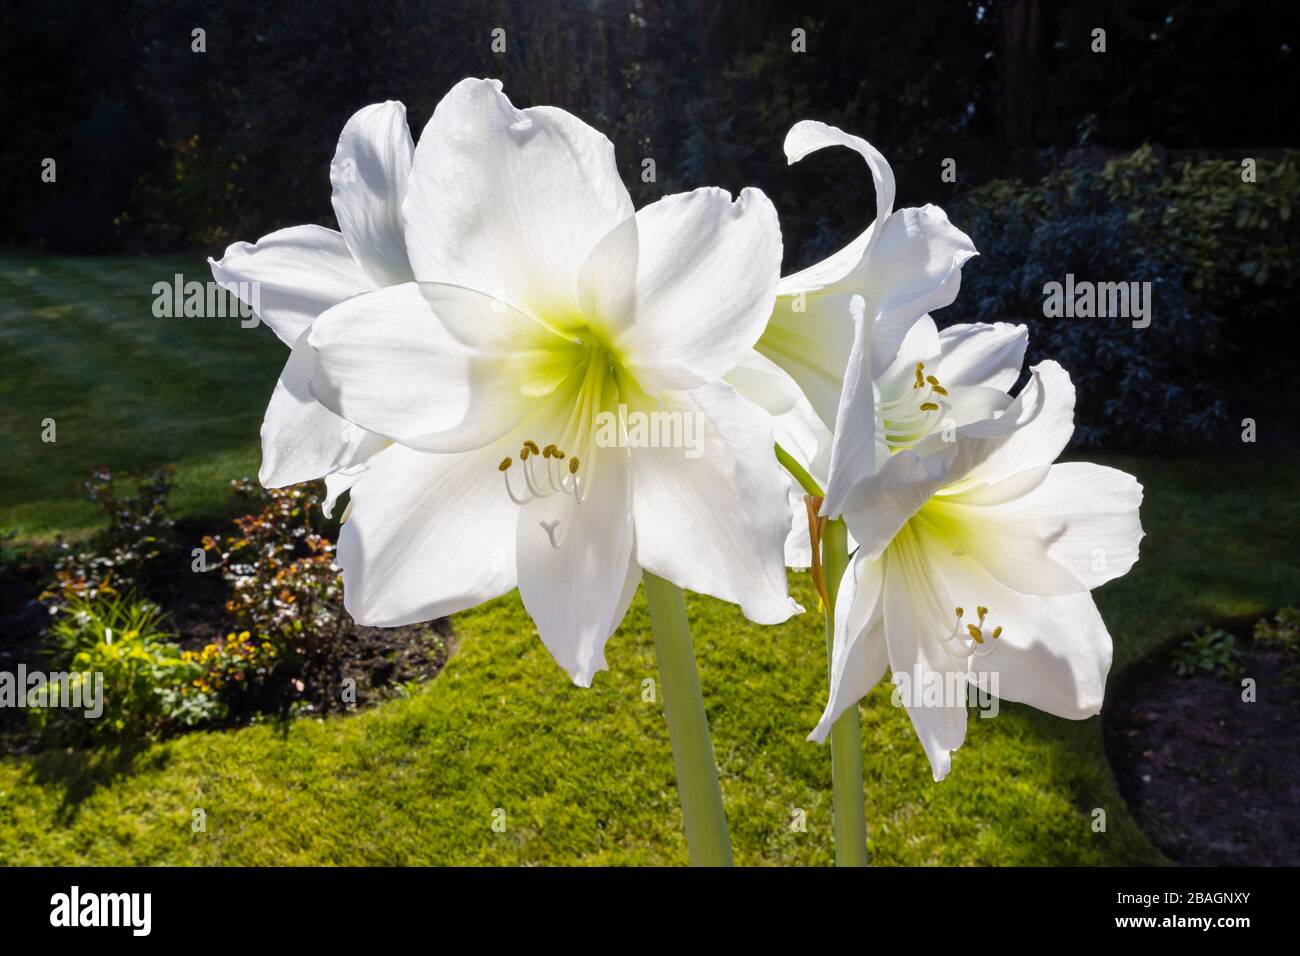 Large white amaryllis (Hippeastrum) in flower, close-up view, photographed outside in a garden on a sunny spring day Stock Photo